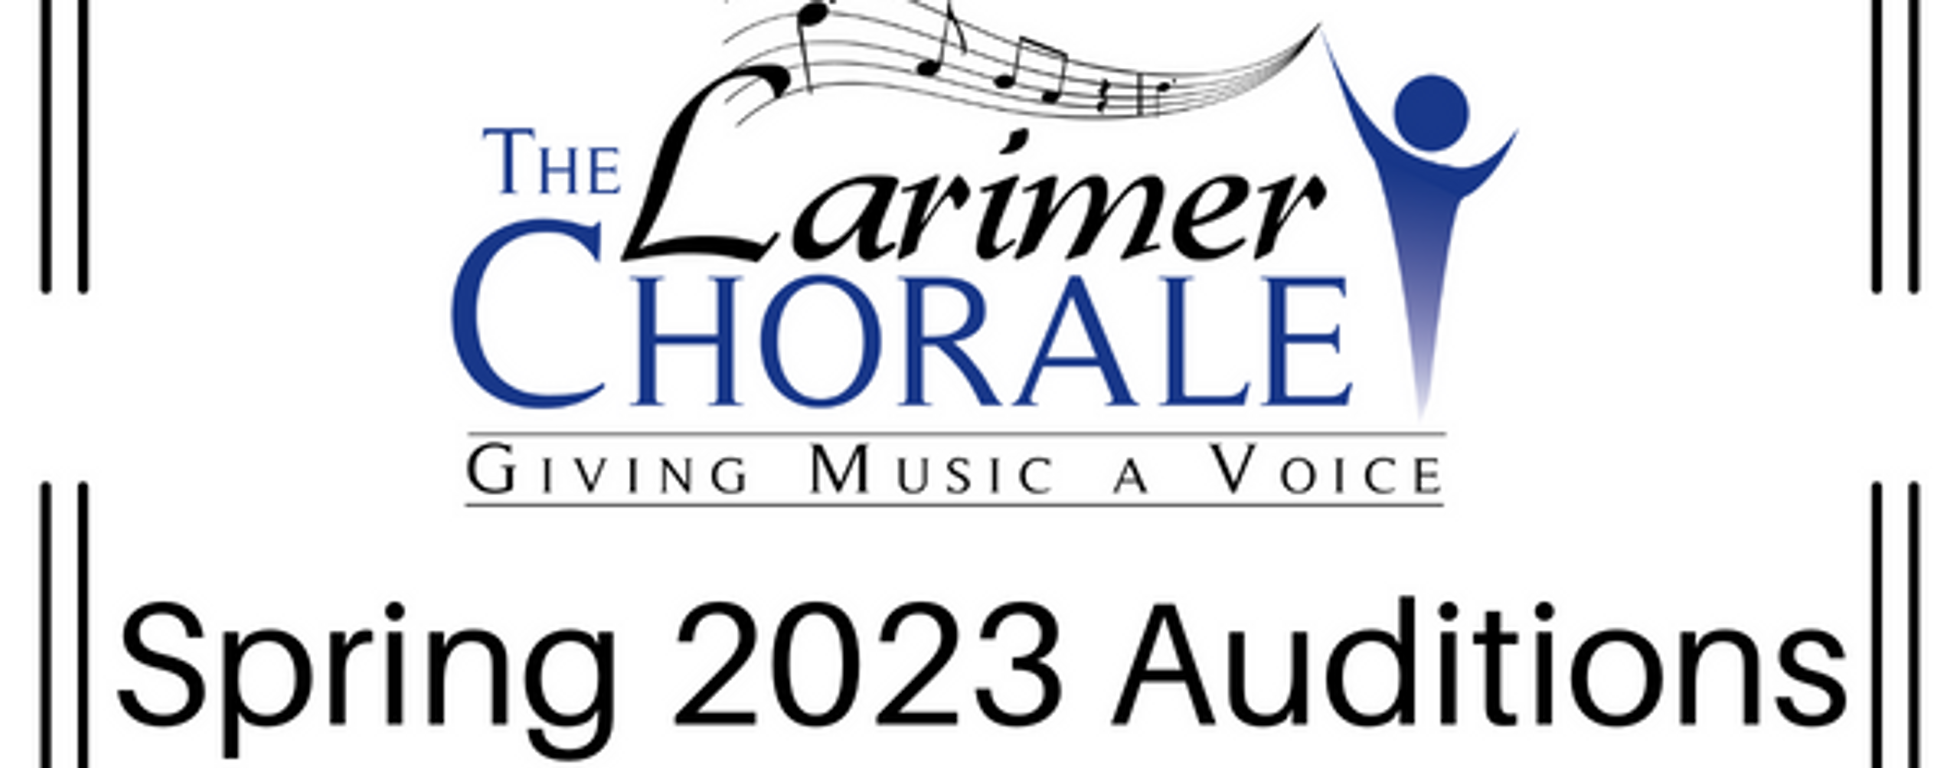 The Larimer Chorale Spring 2023 Auditions